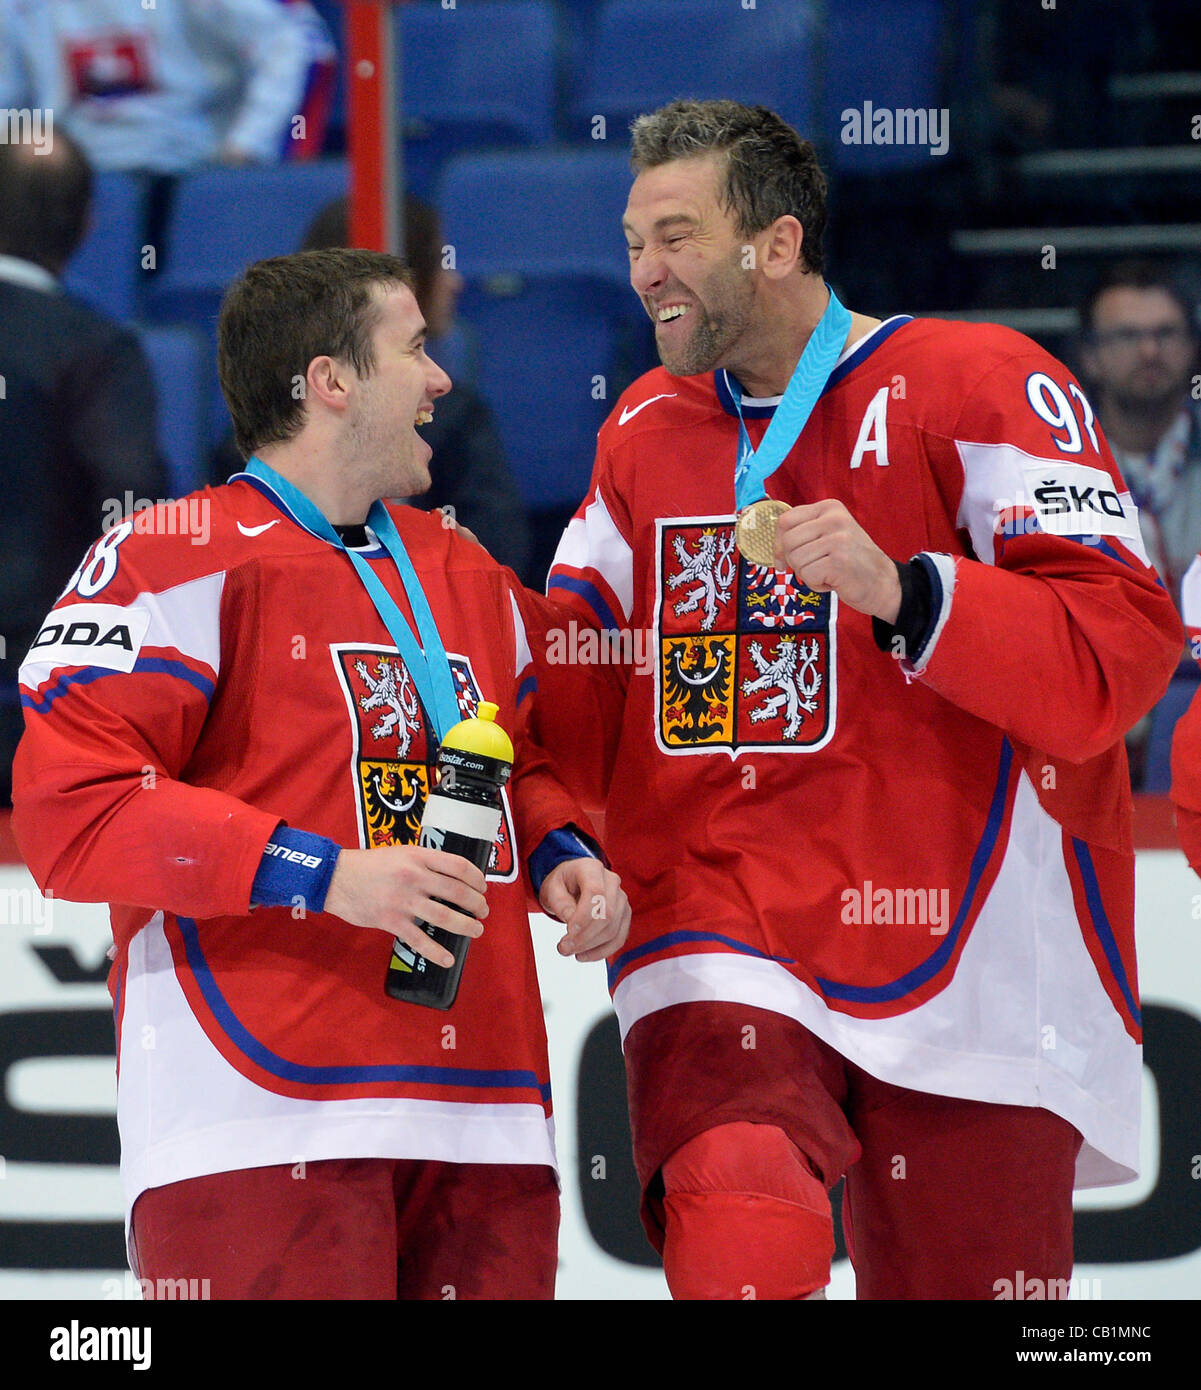 Czech players Jakub Petruzalek, left, and Petr Nedved celebrate with their  medals after the bronze medal game Finland vs Czech Republic of the 2012  IIHF Ice Hockey World Championships in Helsinki, Finland,